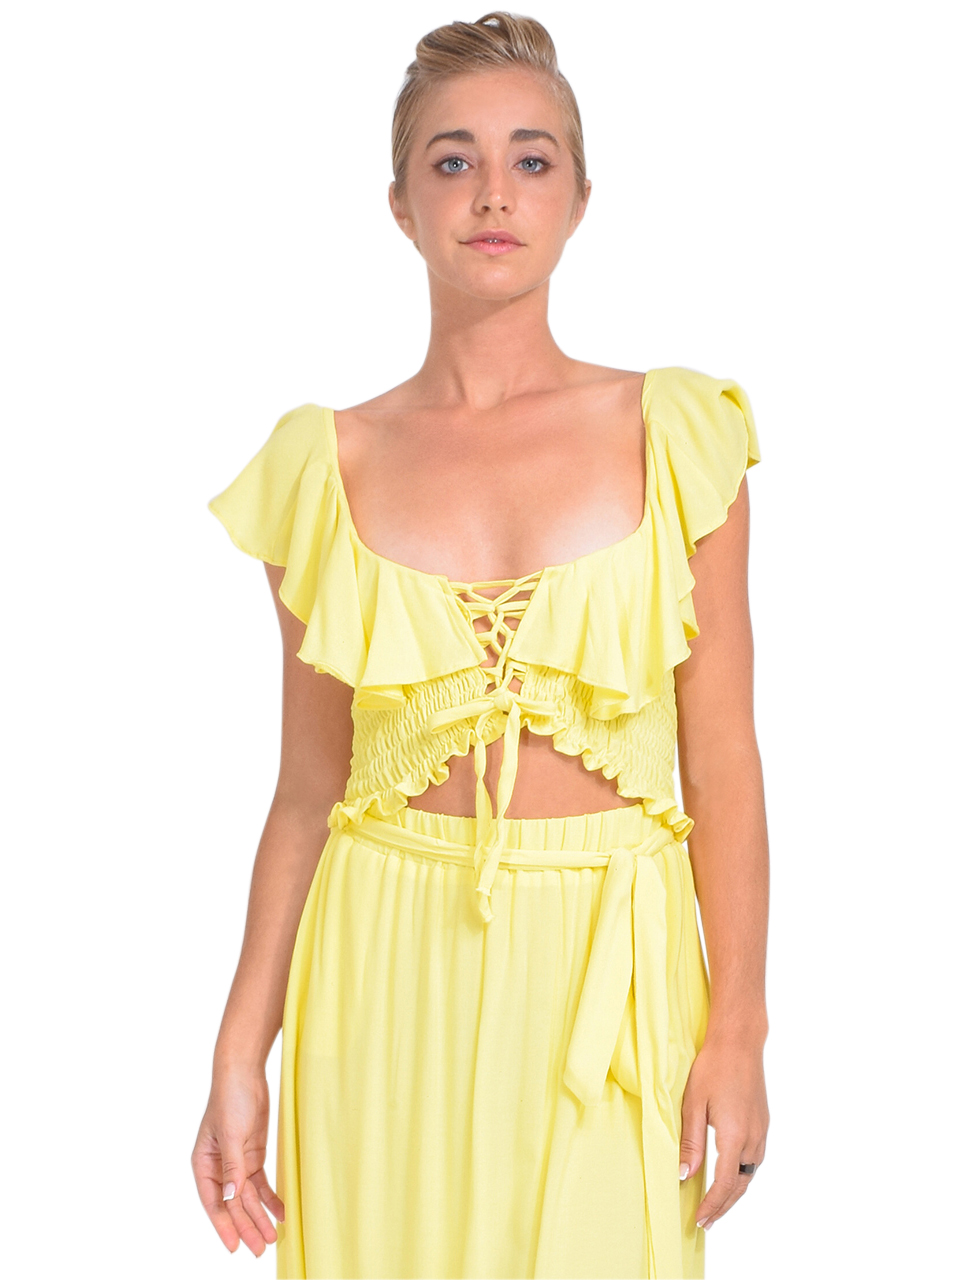 KASIA Sifnos Crop Top in Yellow Front View 1
